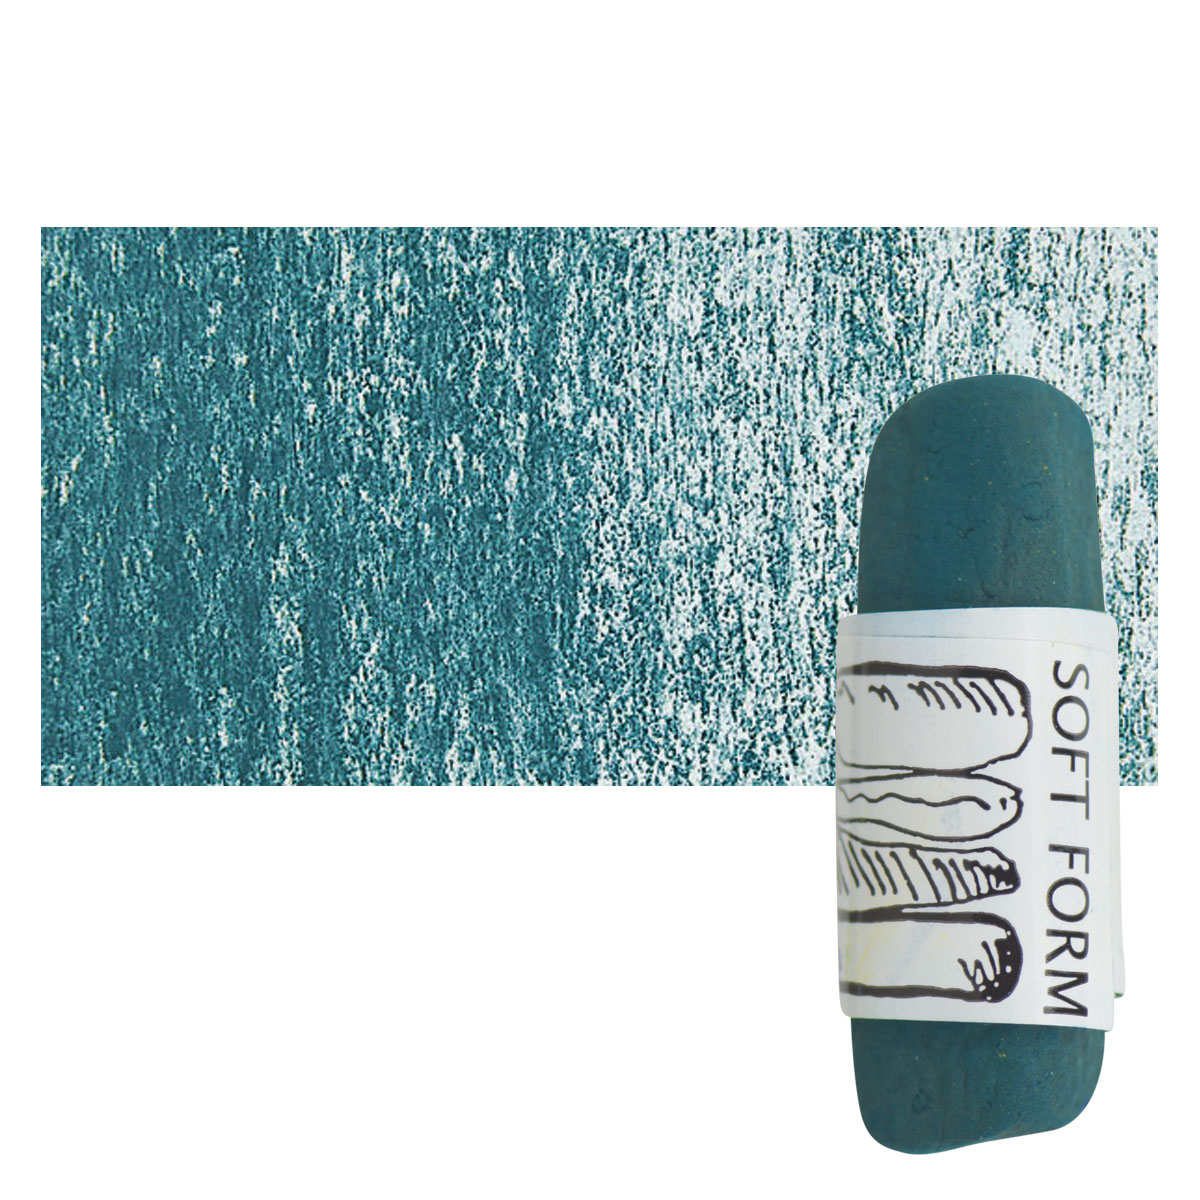 Townsend Artists' Soft Form Pastel - Turquoise Green 033D